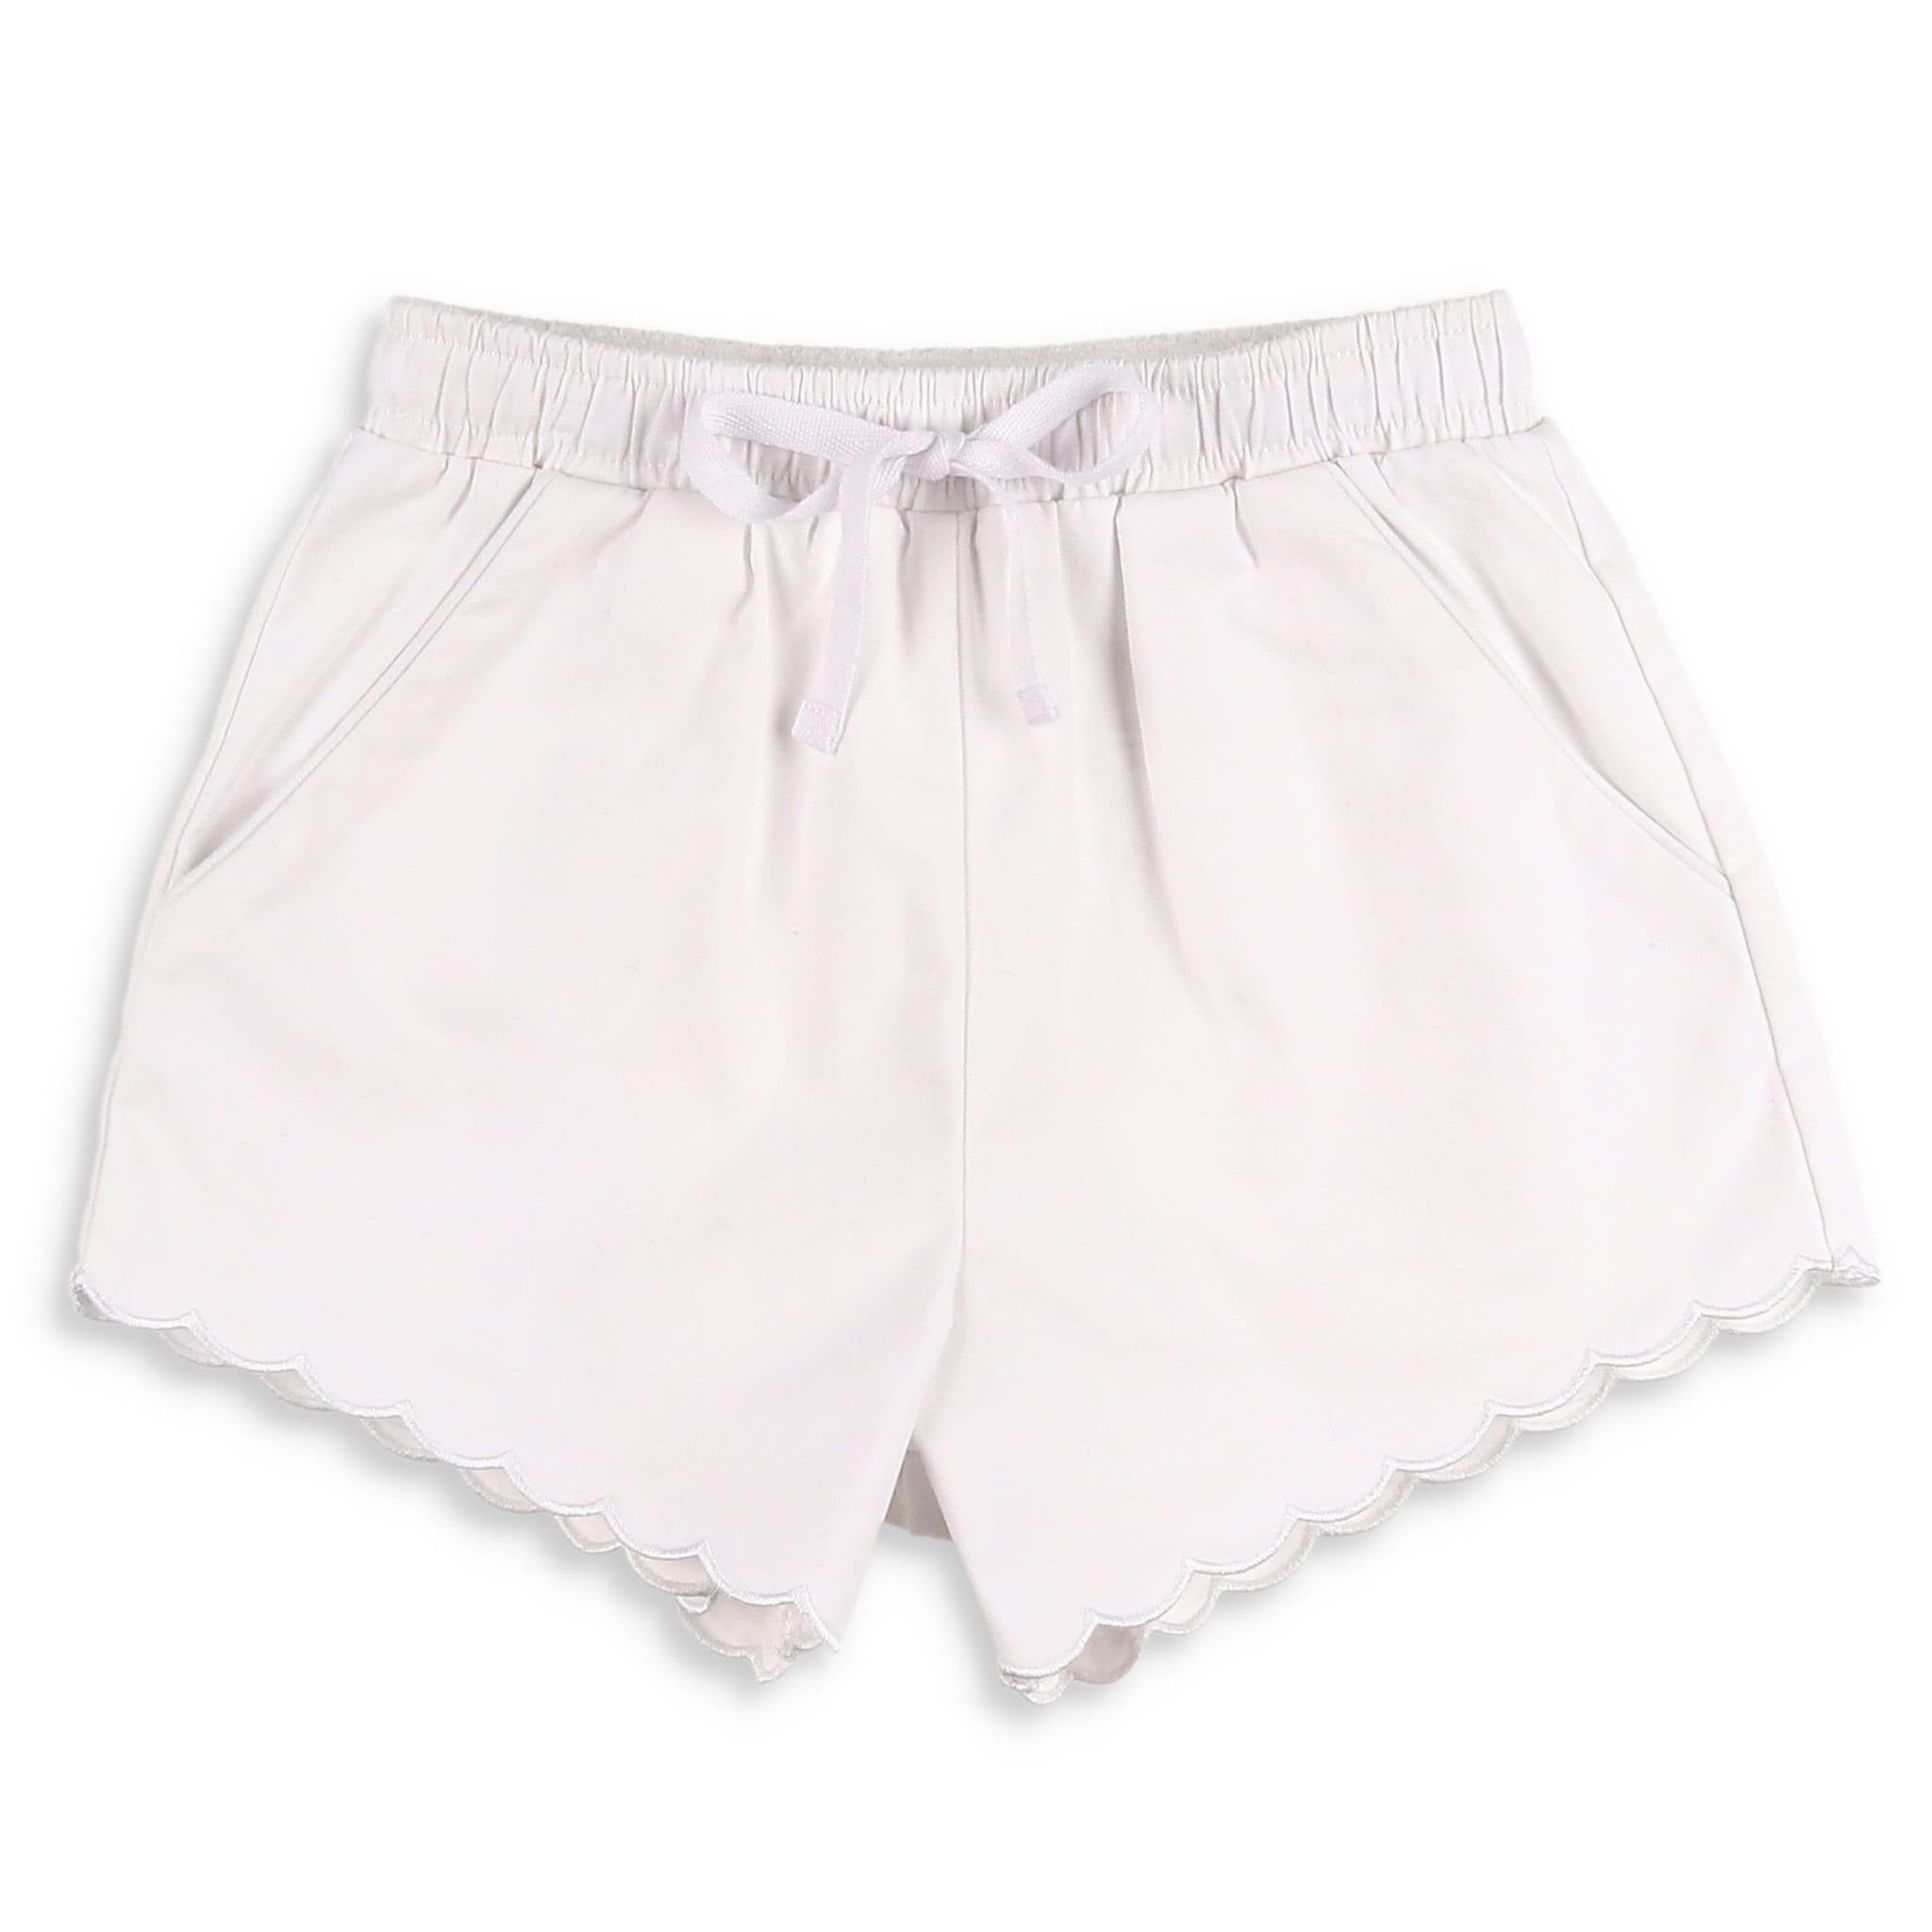 Miss Grant Kids cut-out fringed shorts - White